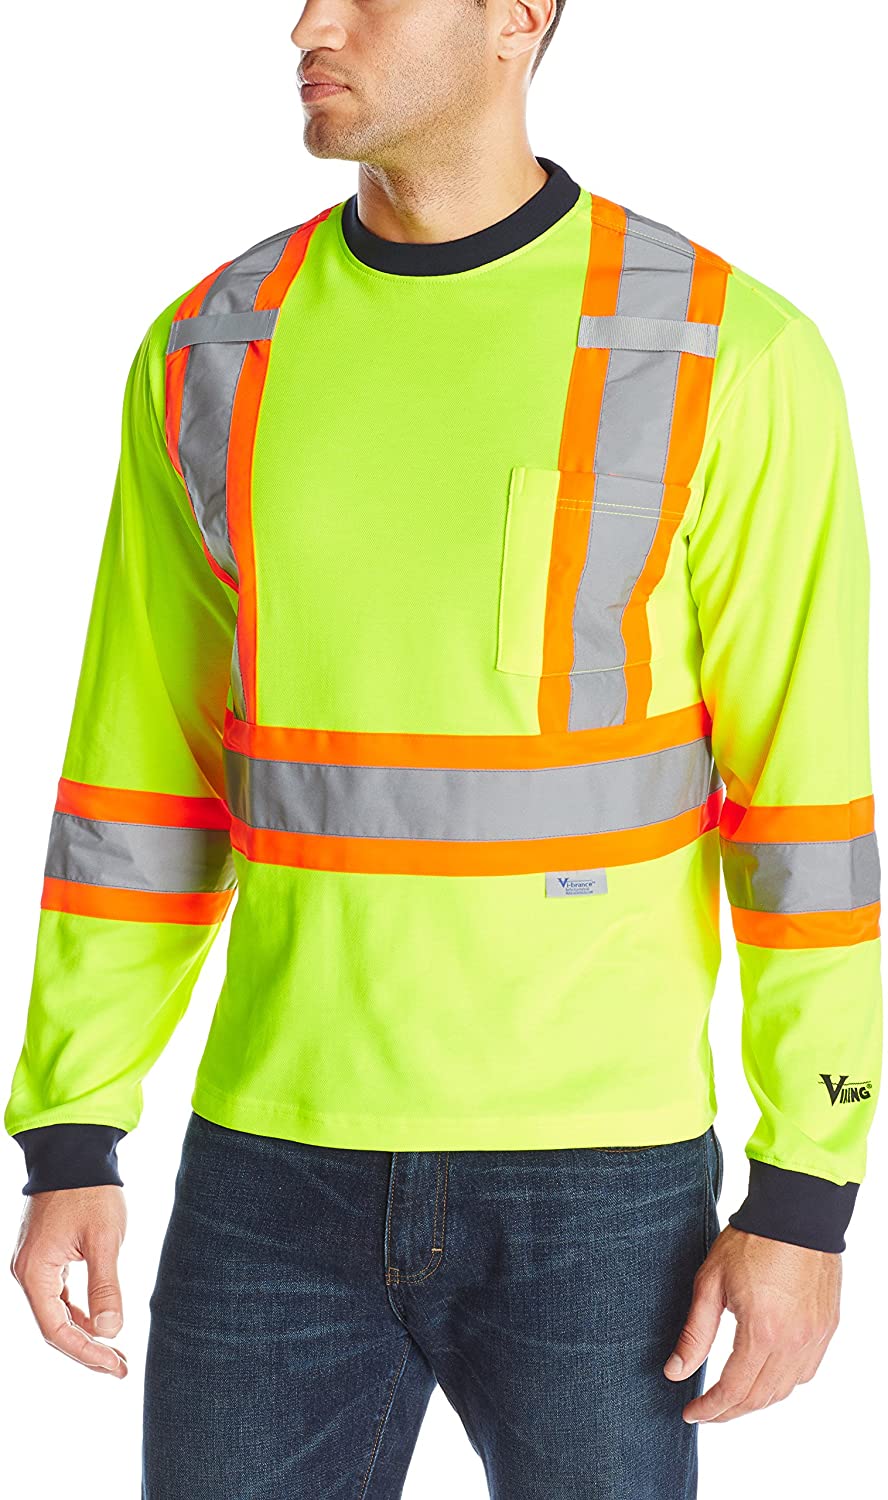 Men's Viking Hi-Vis Class 2 Safety Cotton Lined Long Sleeve Shirt in Green from the front